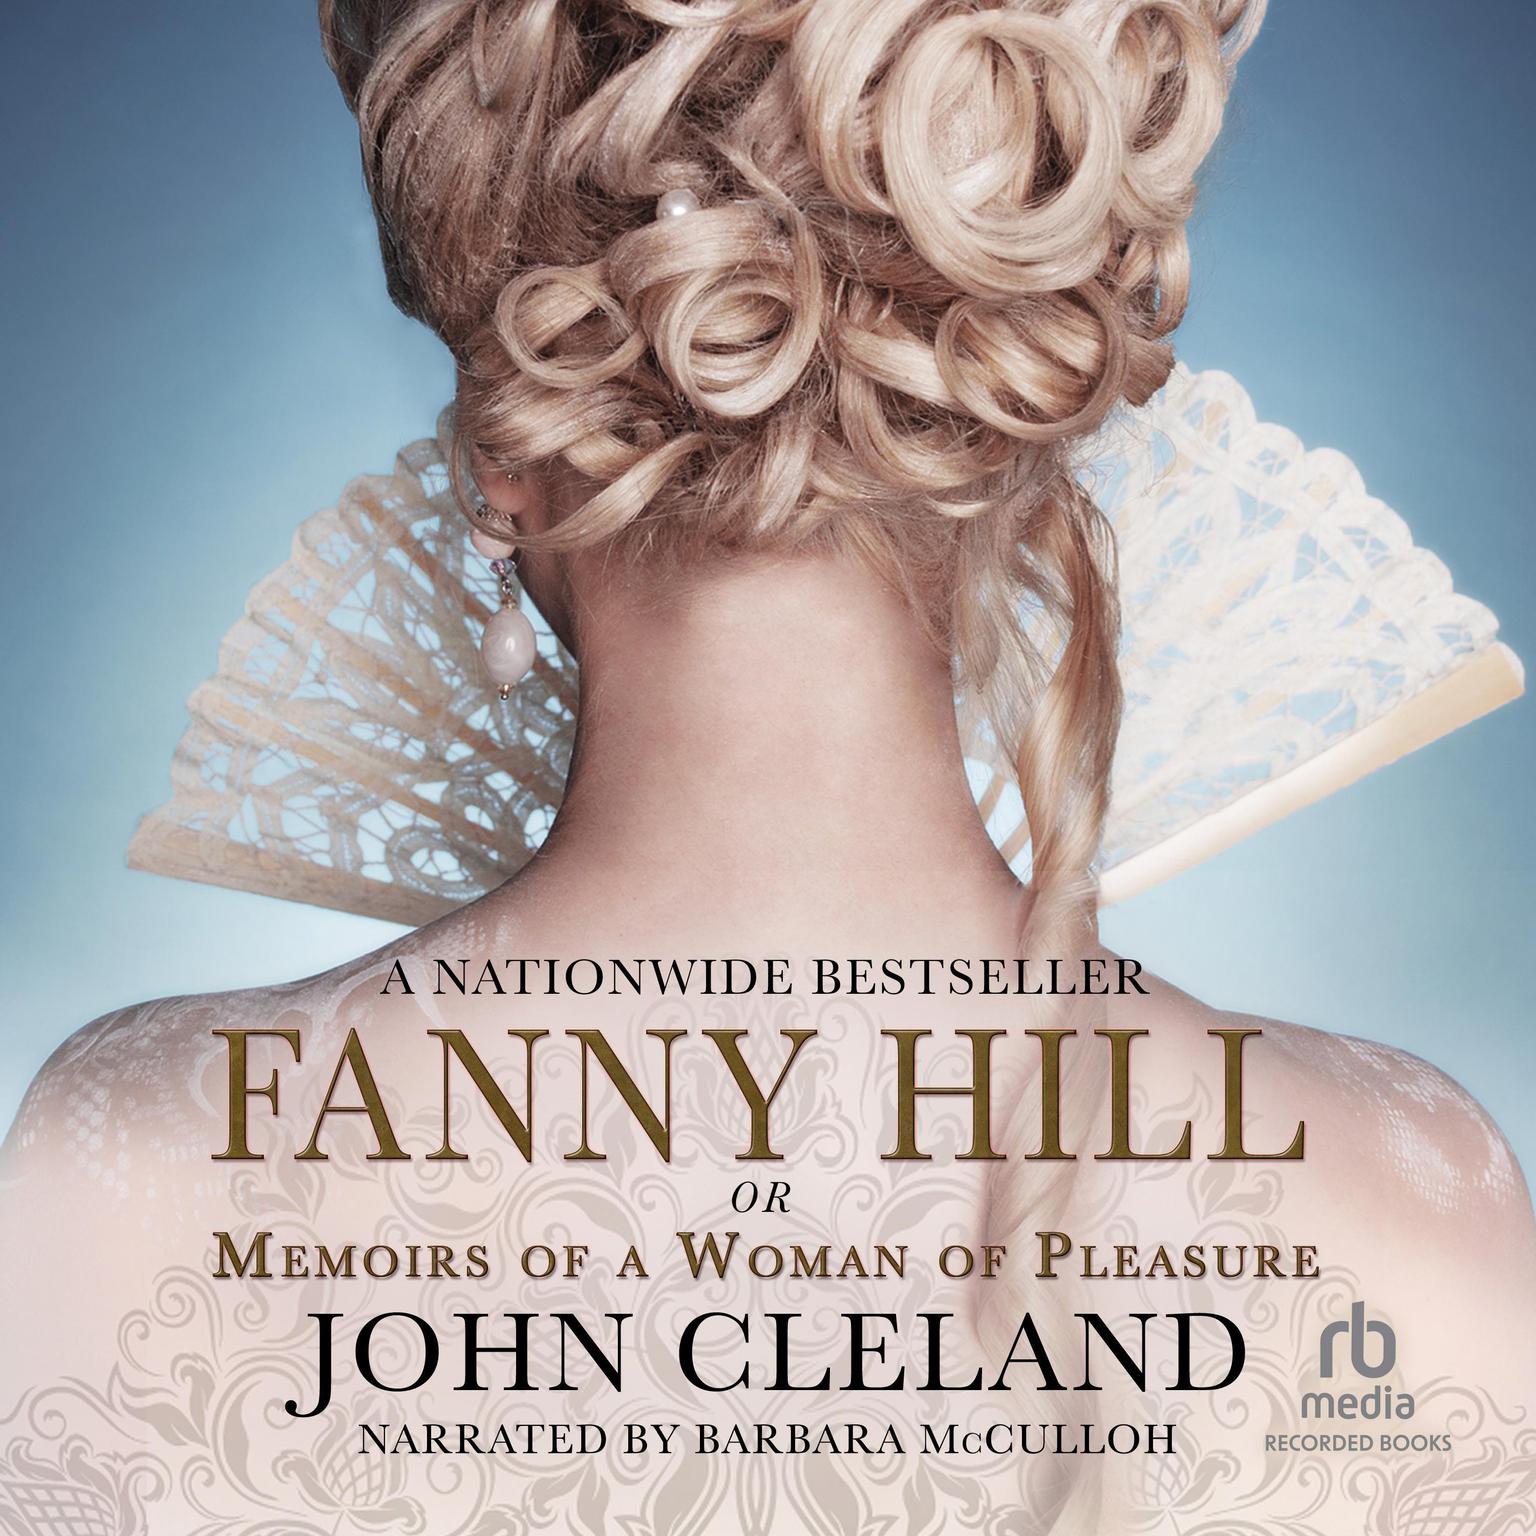 Fanny Hill: Memoirs of a Woman of Pleasure Audiobook, by John Cleland